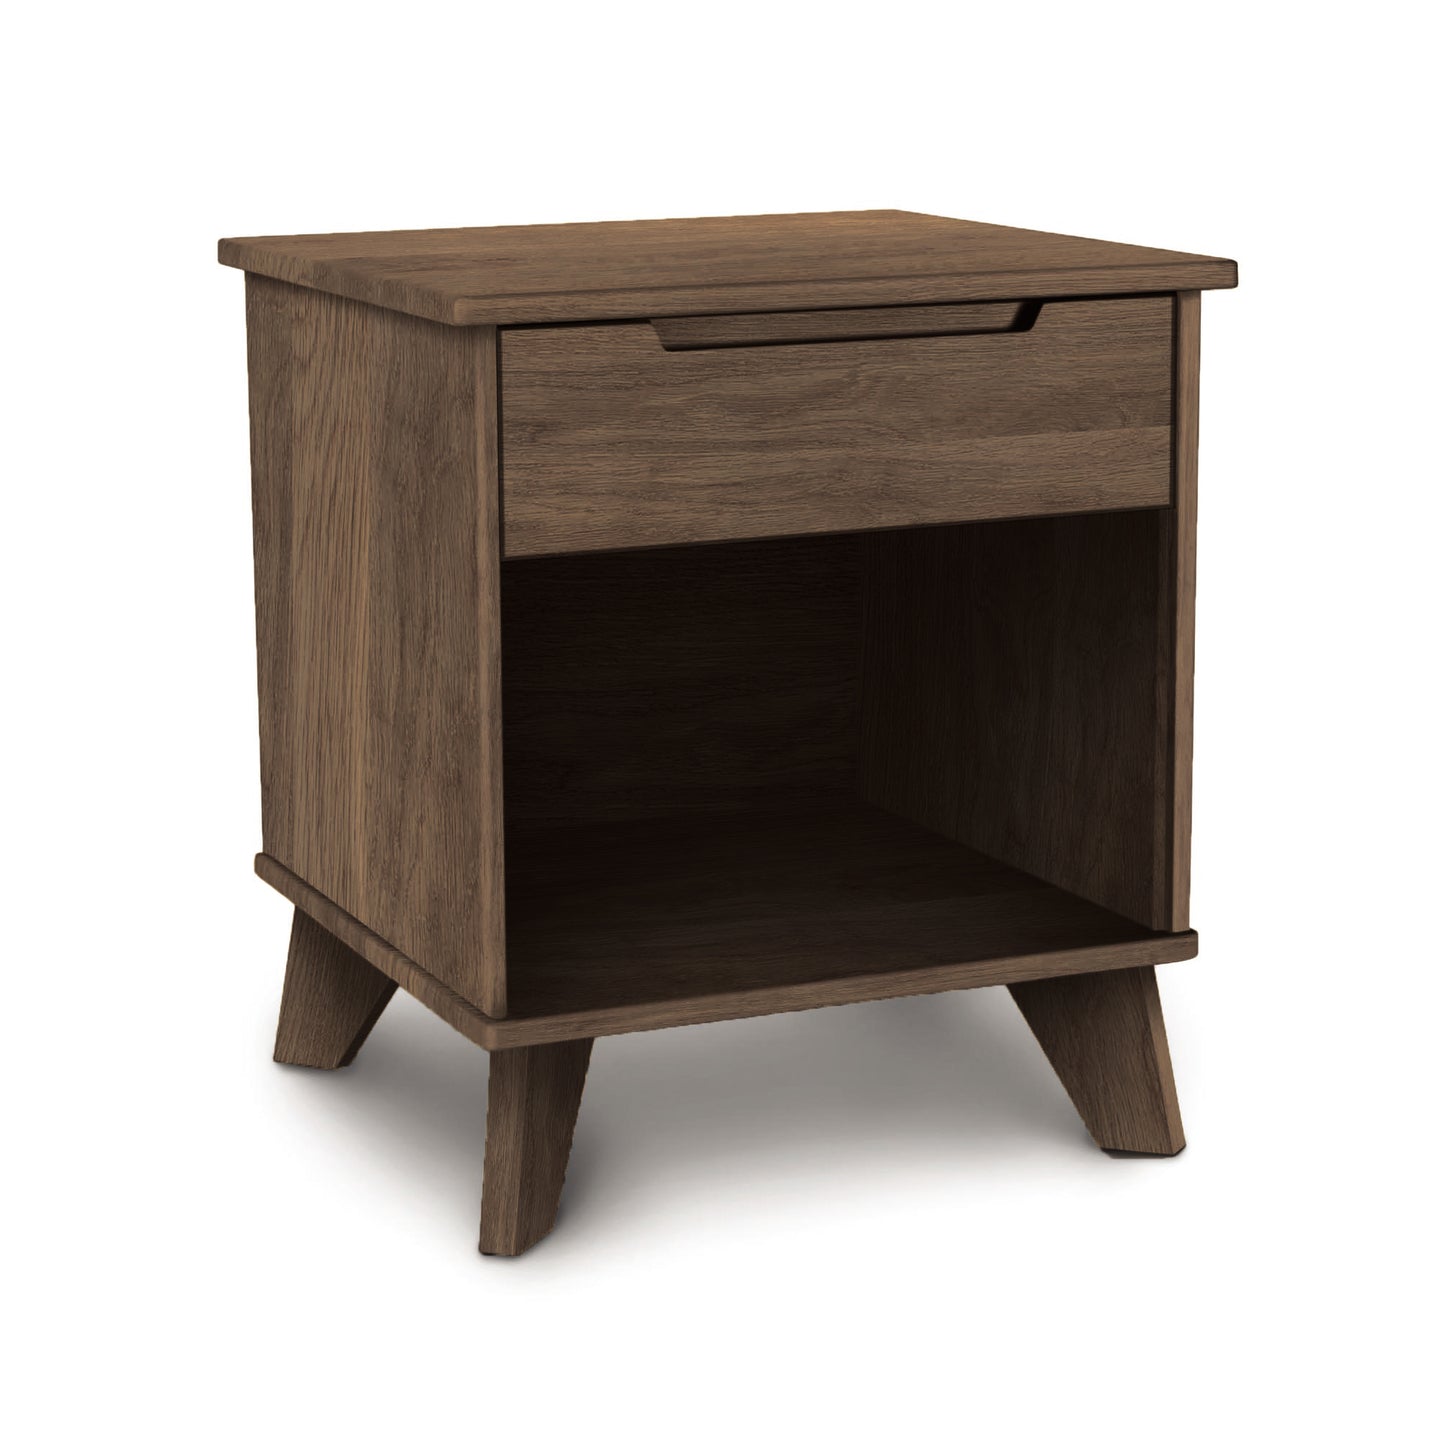 A Linn 1-Drawer Enclosed Shelf Nightstand by Copeland Furniture, featuring an open shelf and a closed drawer with low emissions finishes, isolated on a white background.